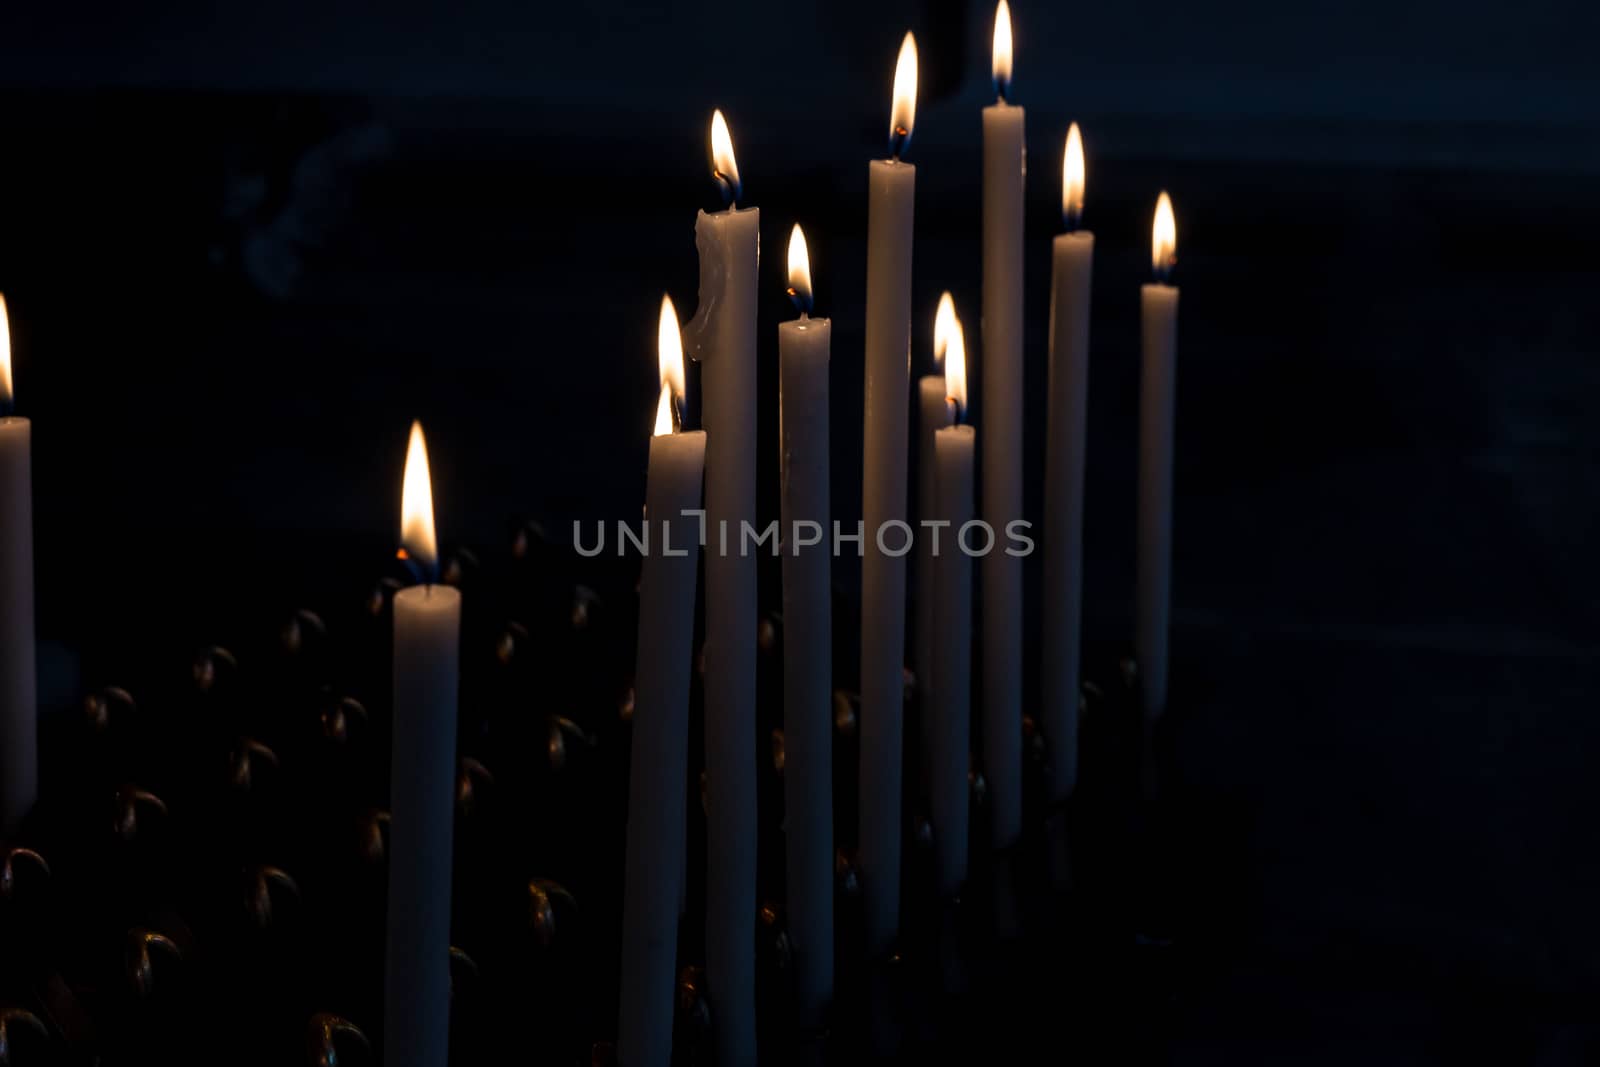 Detail of lit candles in the dark.